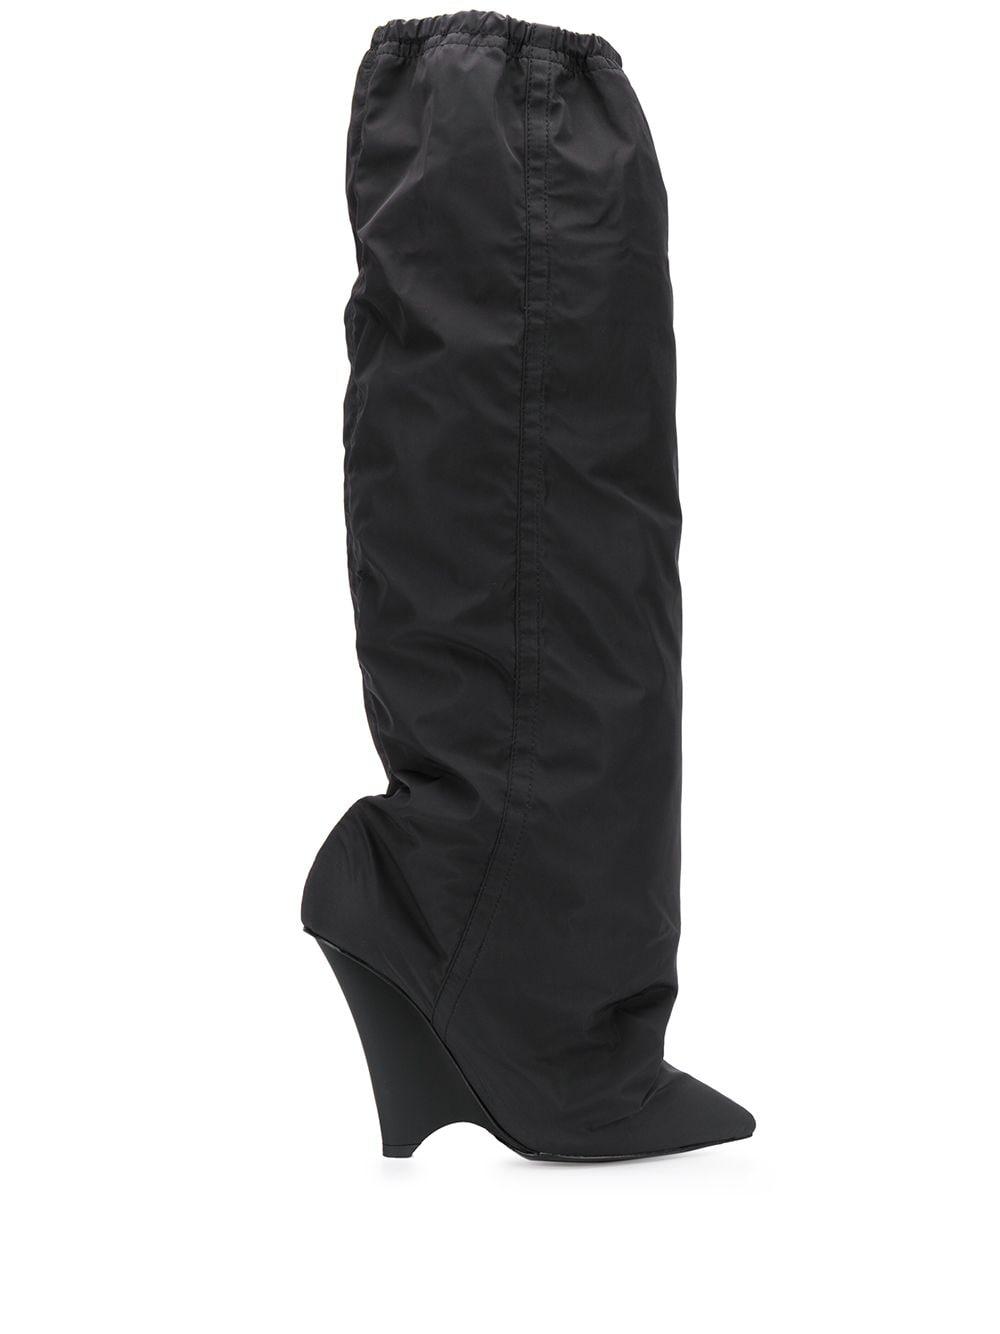 Yeezy 120 Wedge Thigh High Boots in Black | Lyst